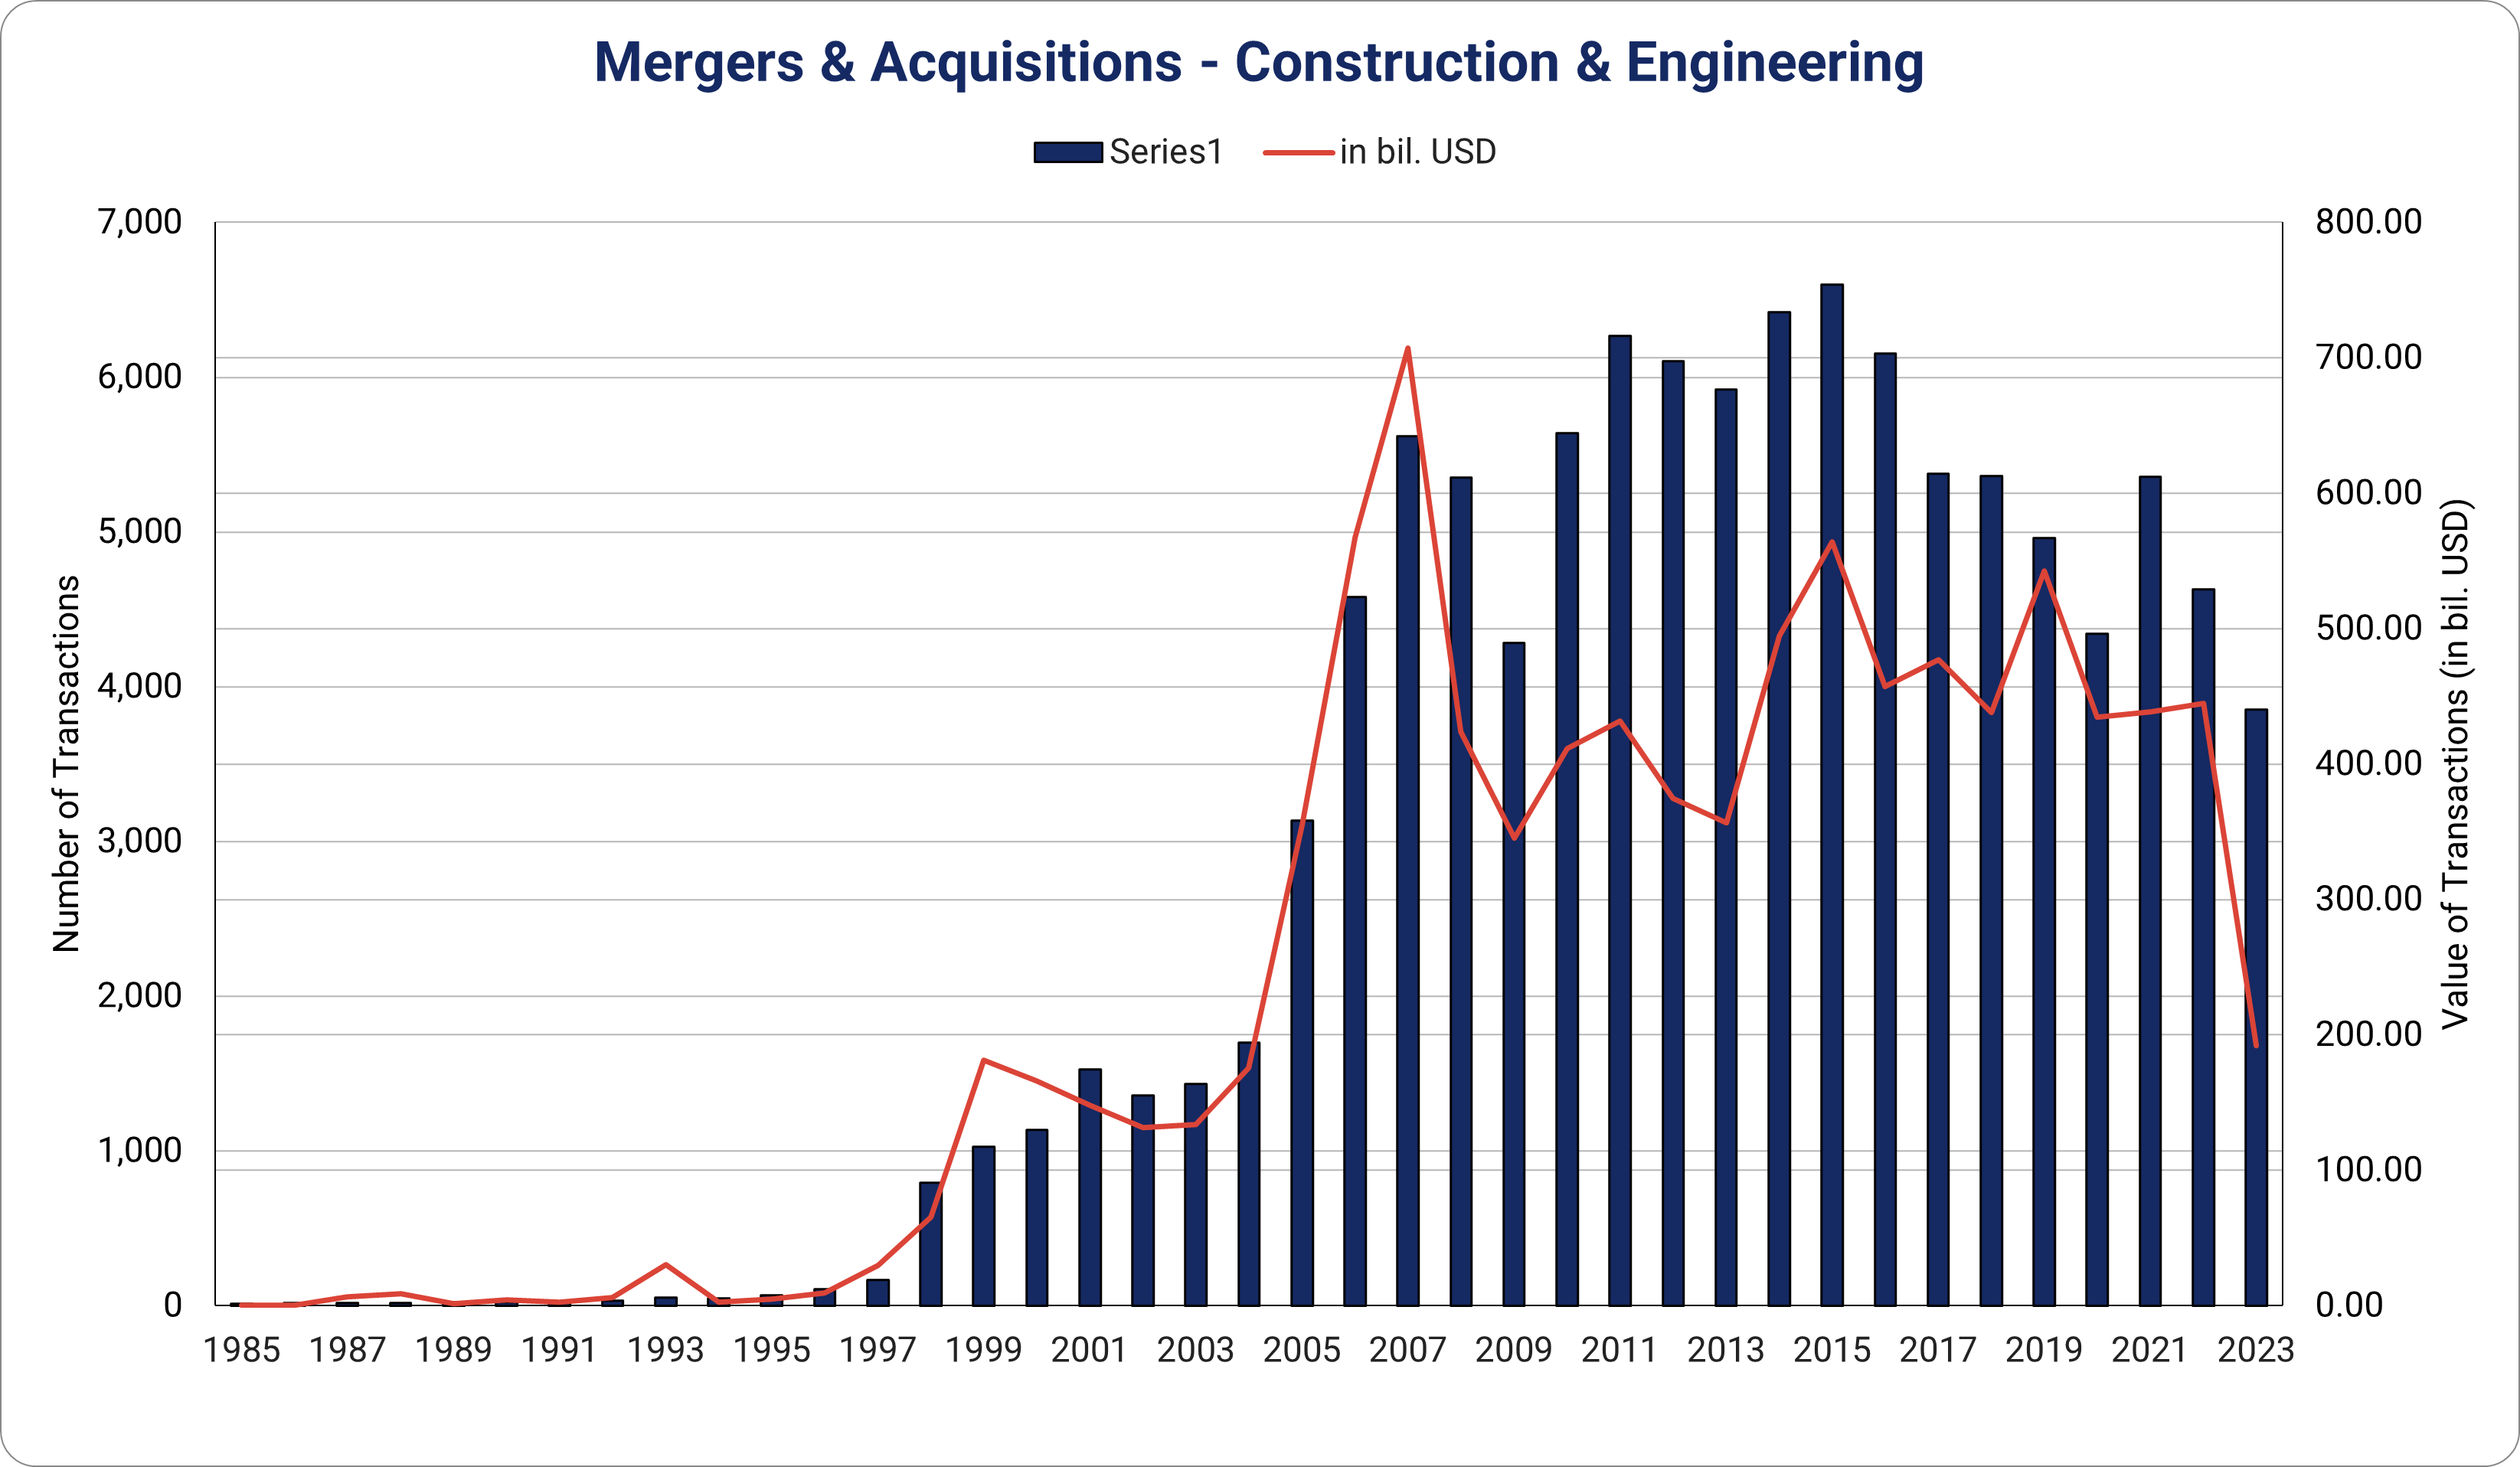 Annual and Monthly M&A Activity for Engineering and Construction